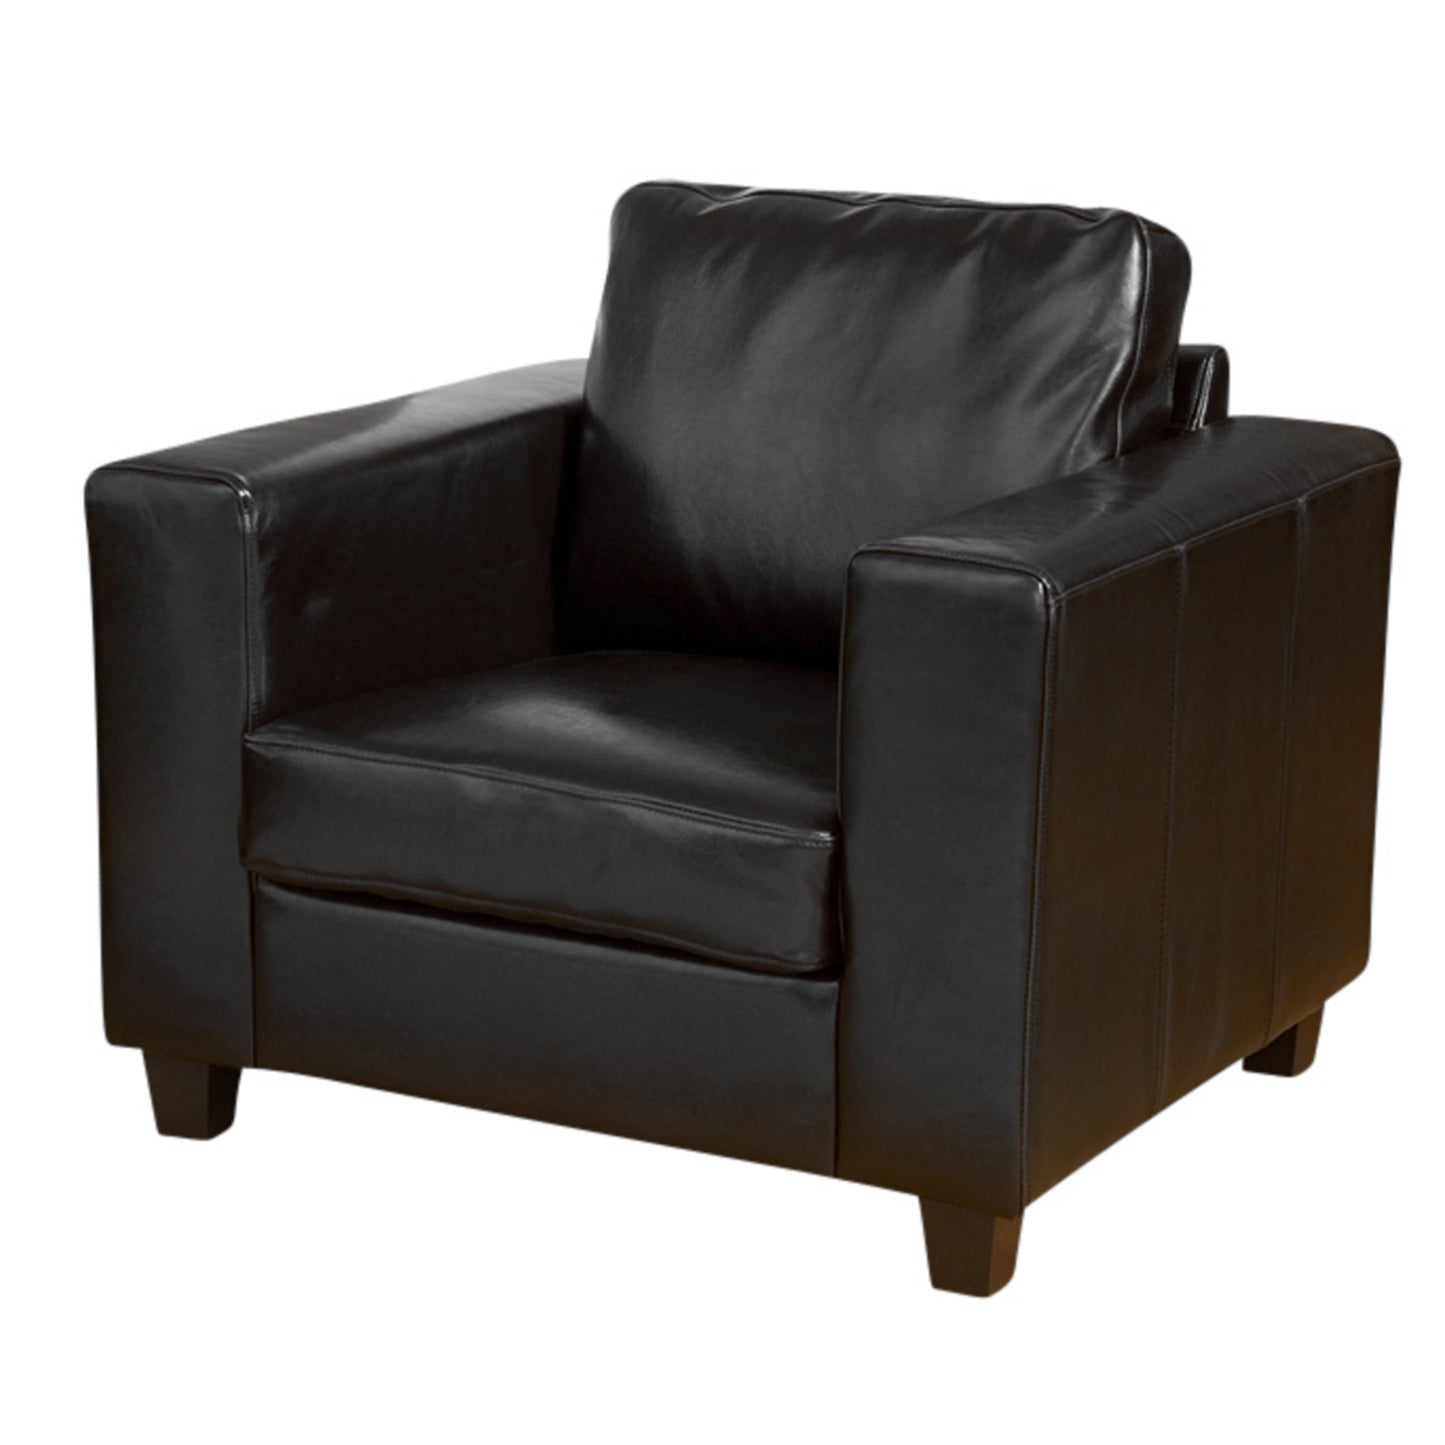 Commercial Grade Leather Sofa Available in black, brown, ivory, red. - CasaFenix